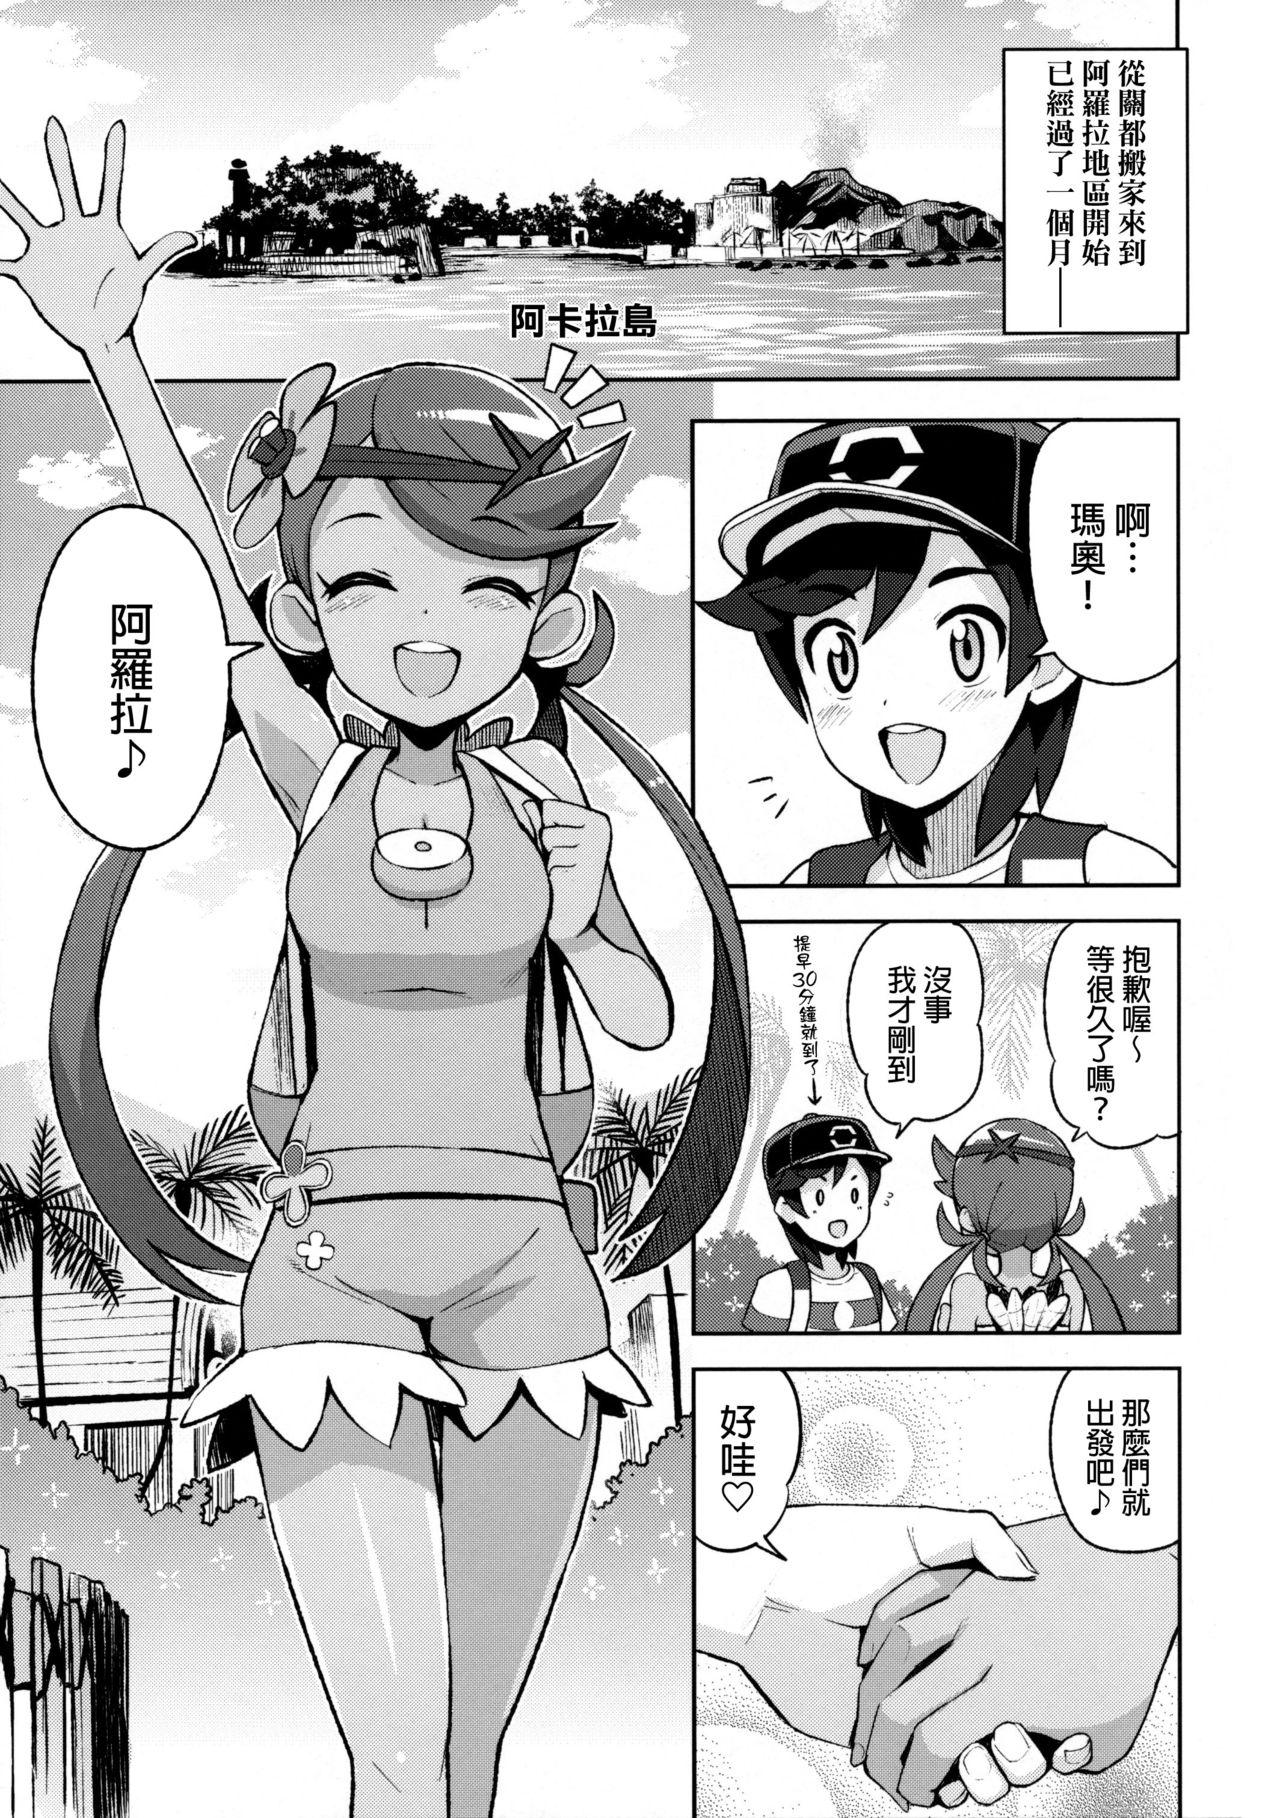 Ejaculations MAO FRIENDS - Pokemon | pocket monsters Casal - Page 4